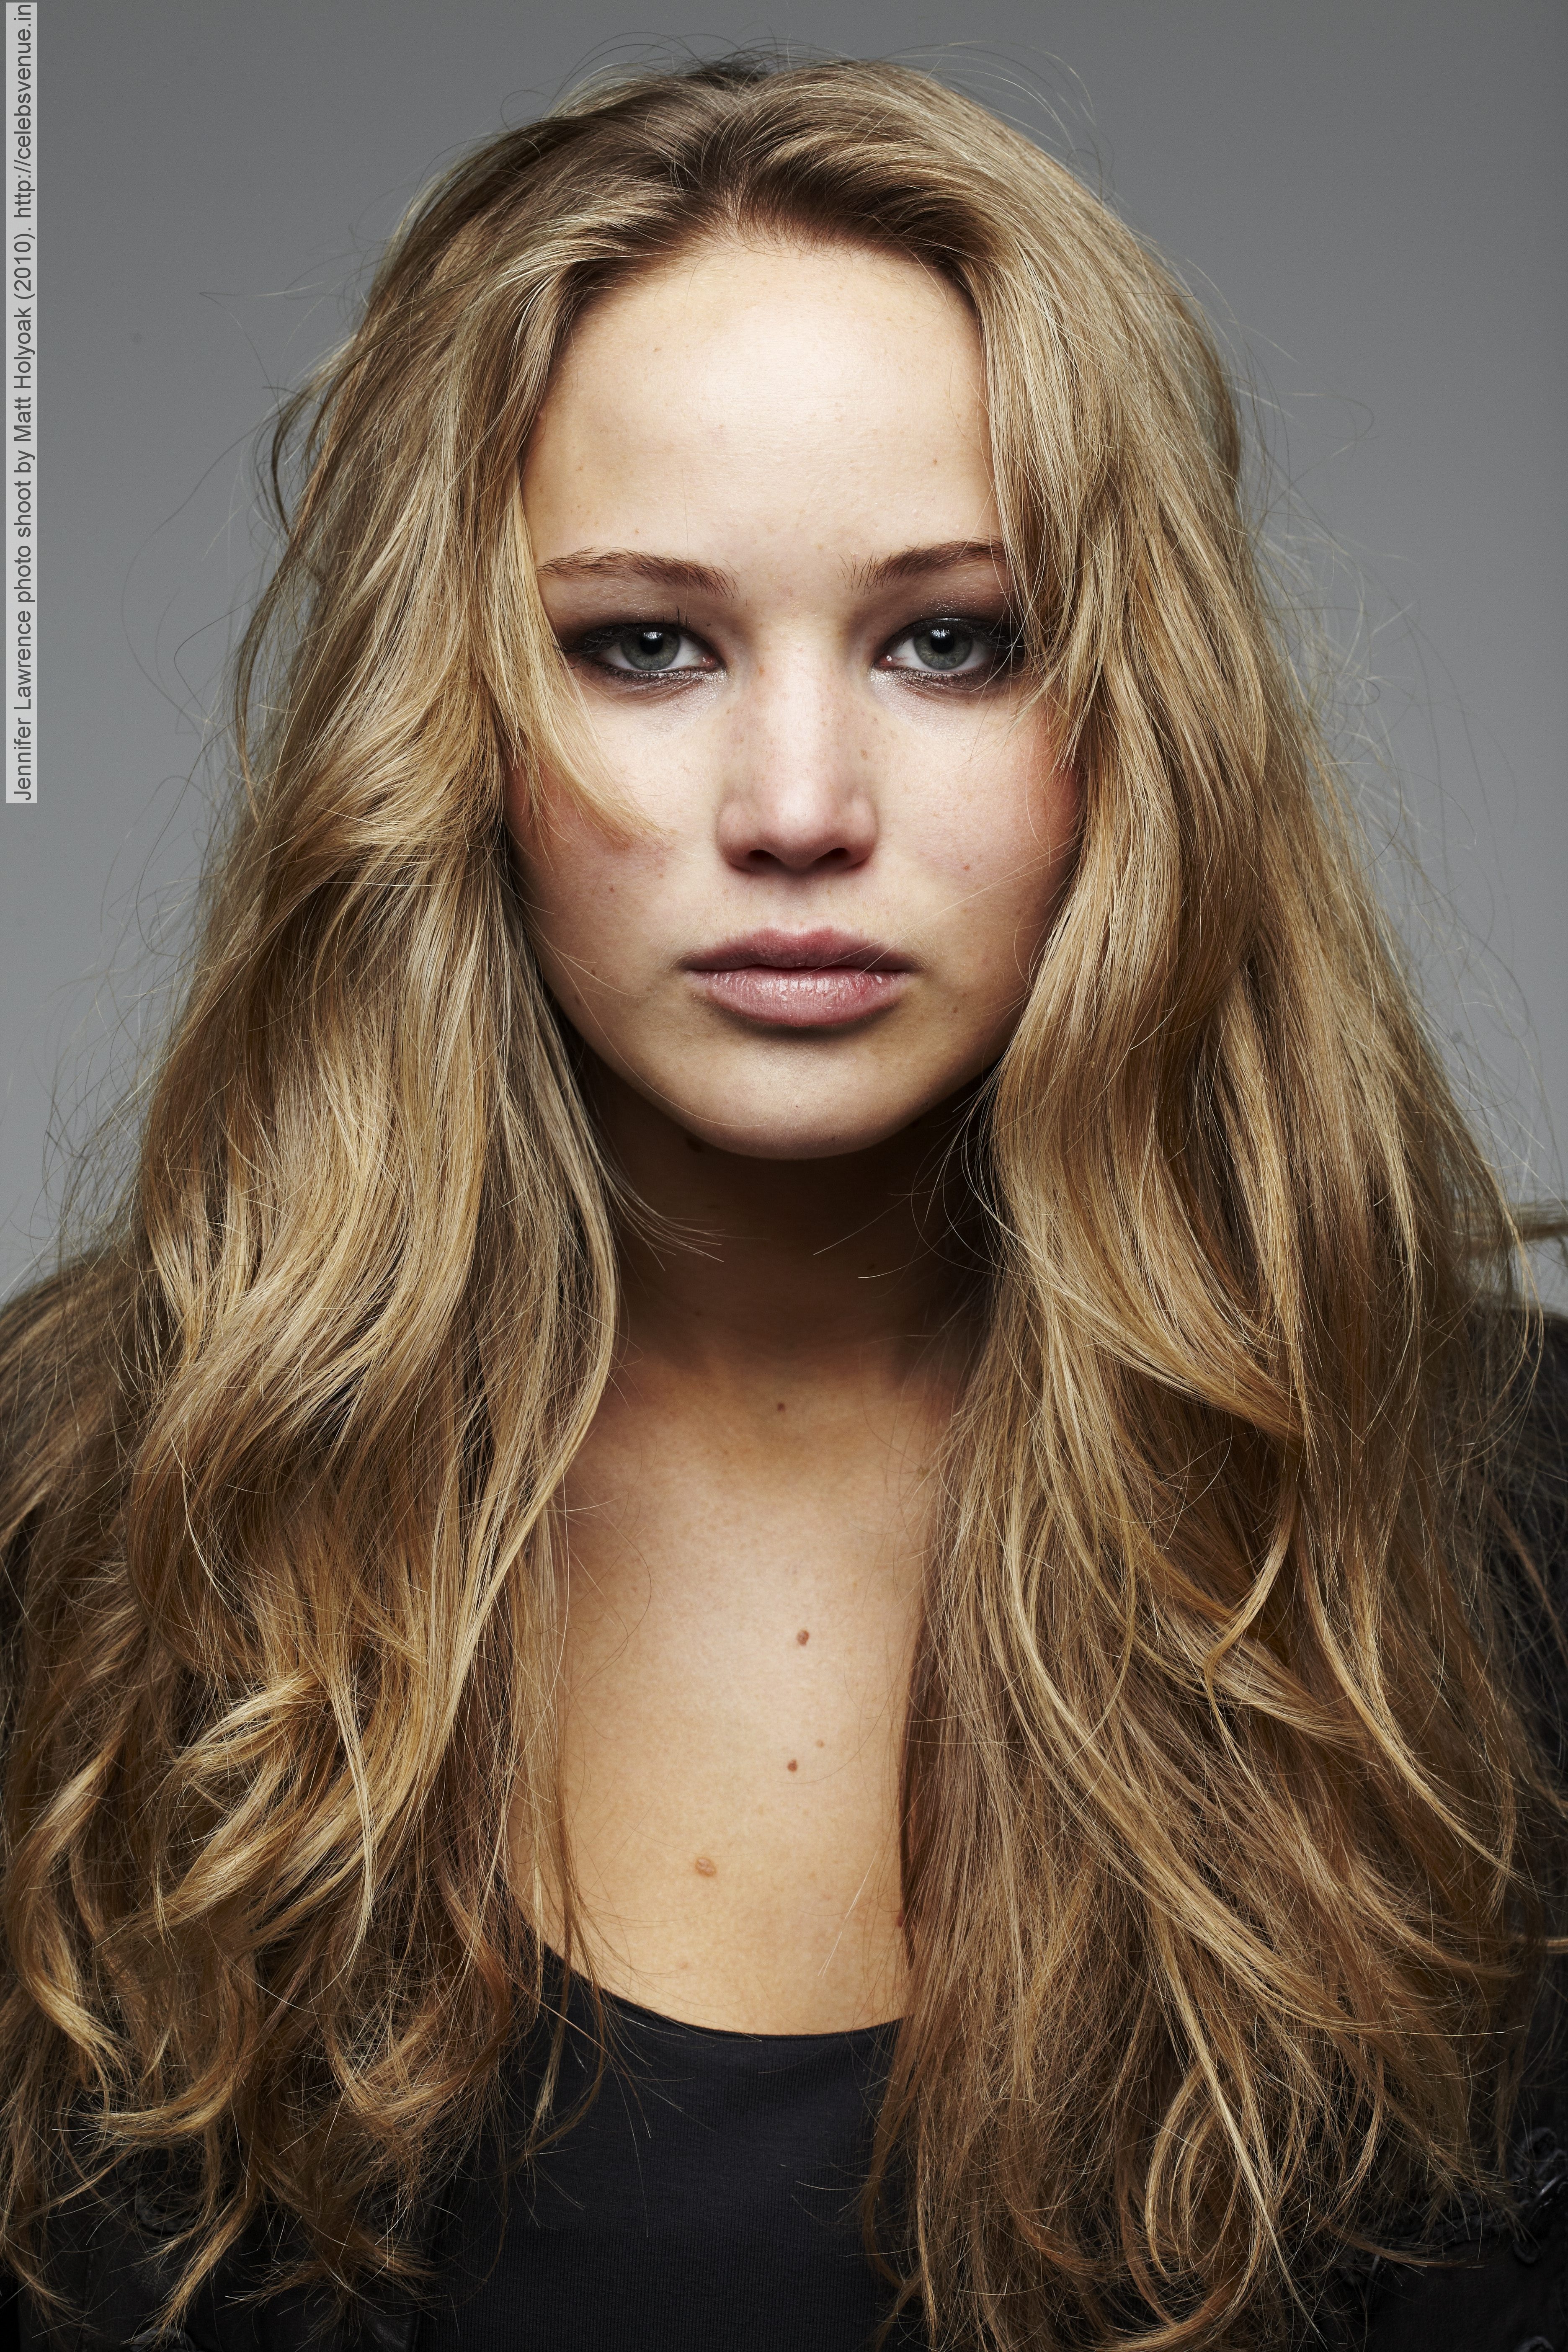 Pictures of Jennifer Lawrence - Pictures Of Celebrities